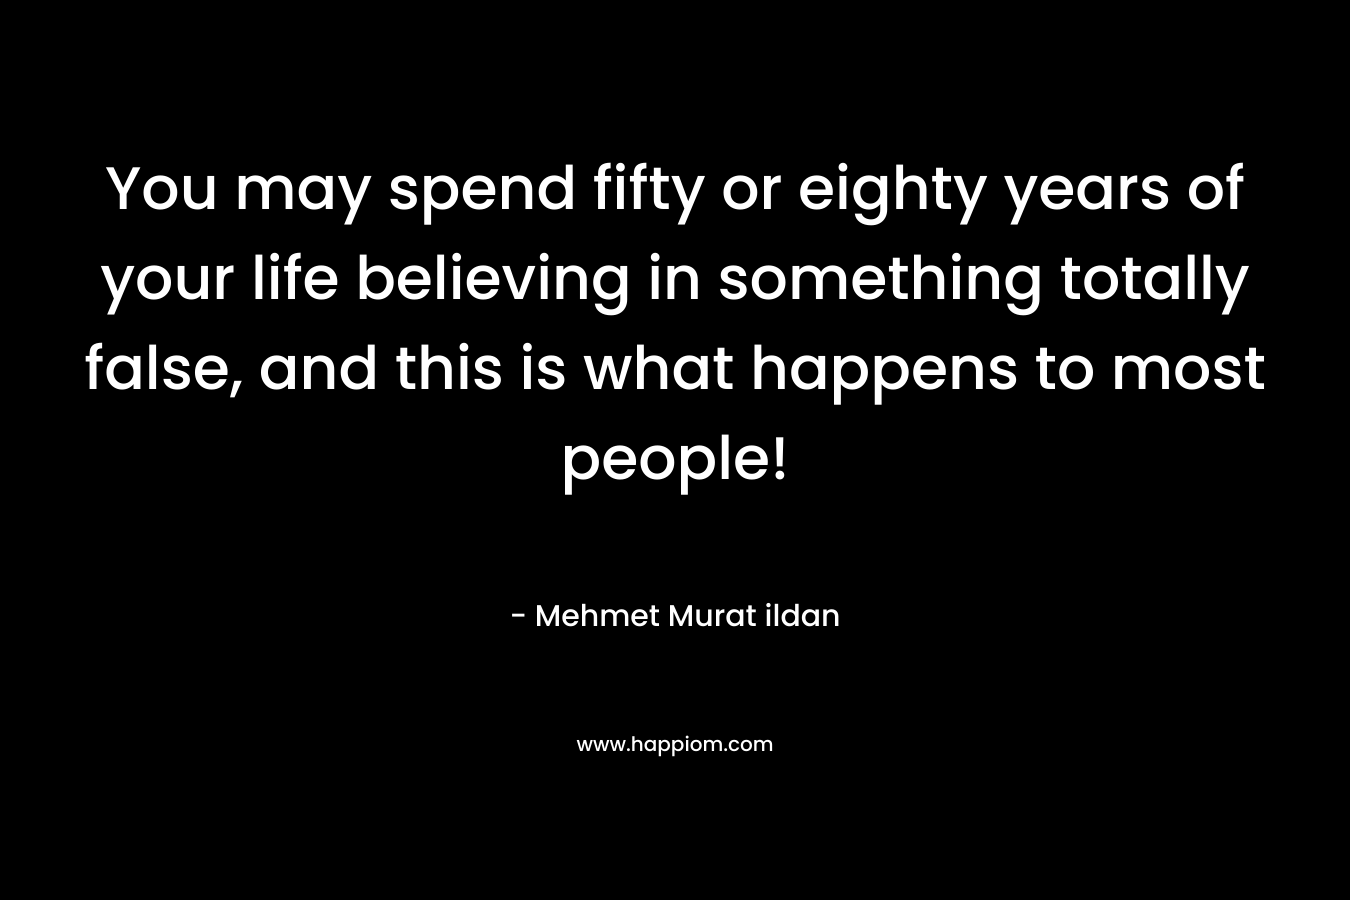 You may spend fifty or eighty years of your life believing in something totally false, and this is what happens to most people! – Mehmet Murat ildan